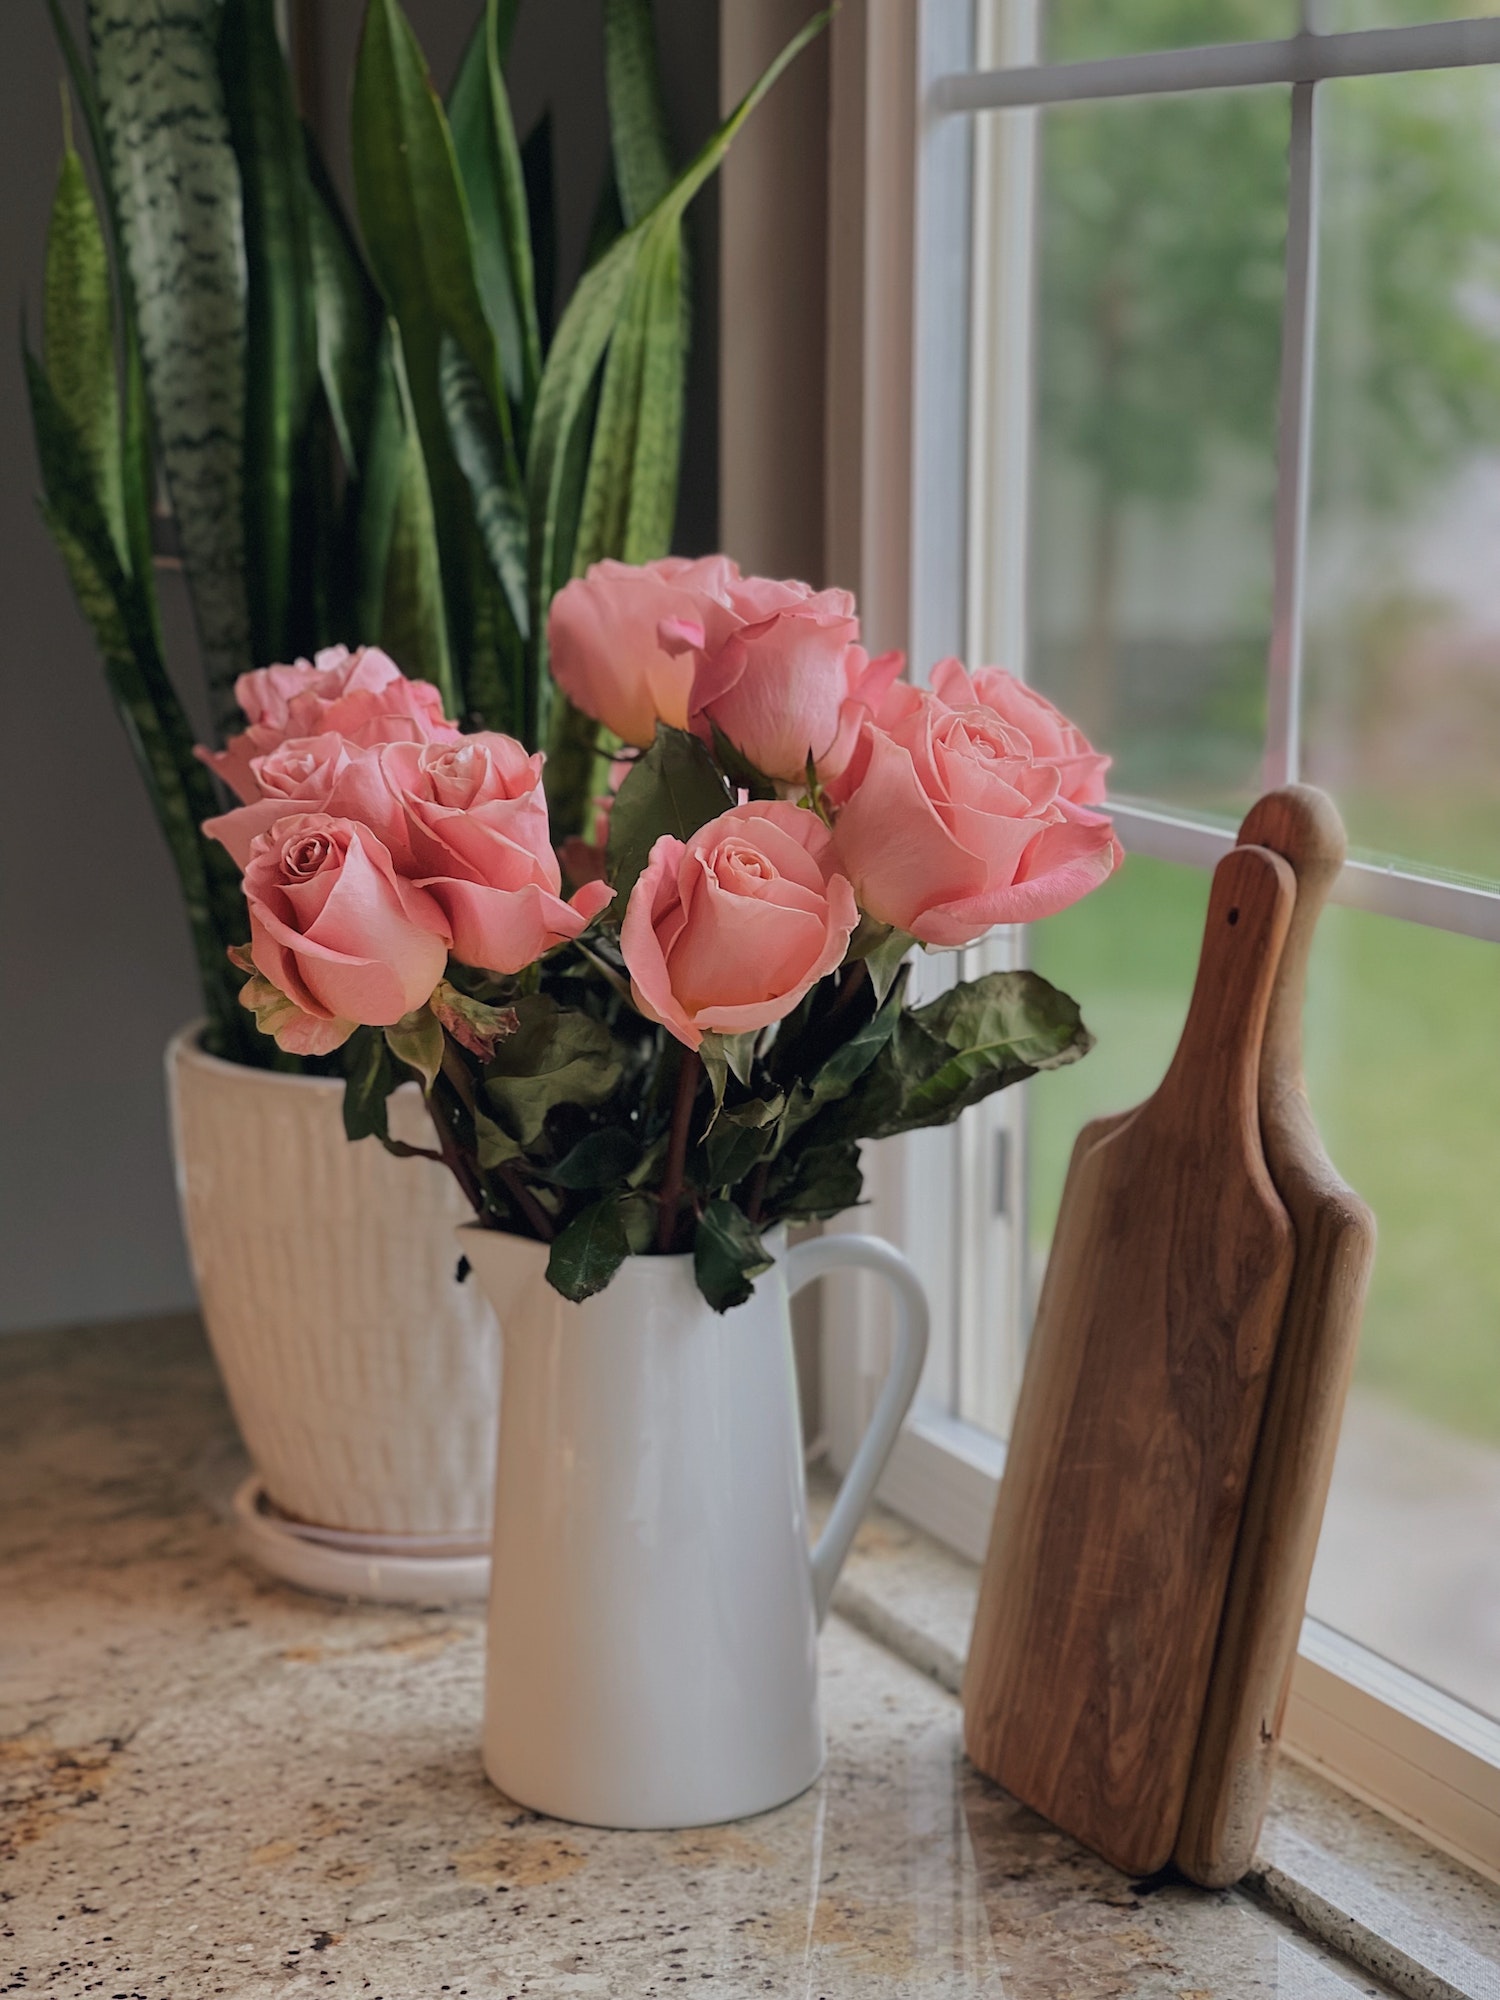 A bouquet of soft pink roses in a white pitcher stands next to a window, a potted plant and boards